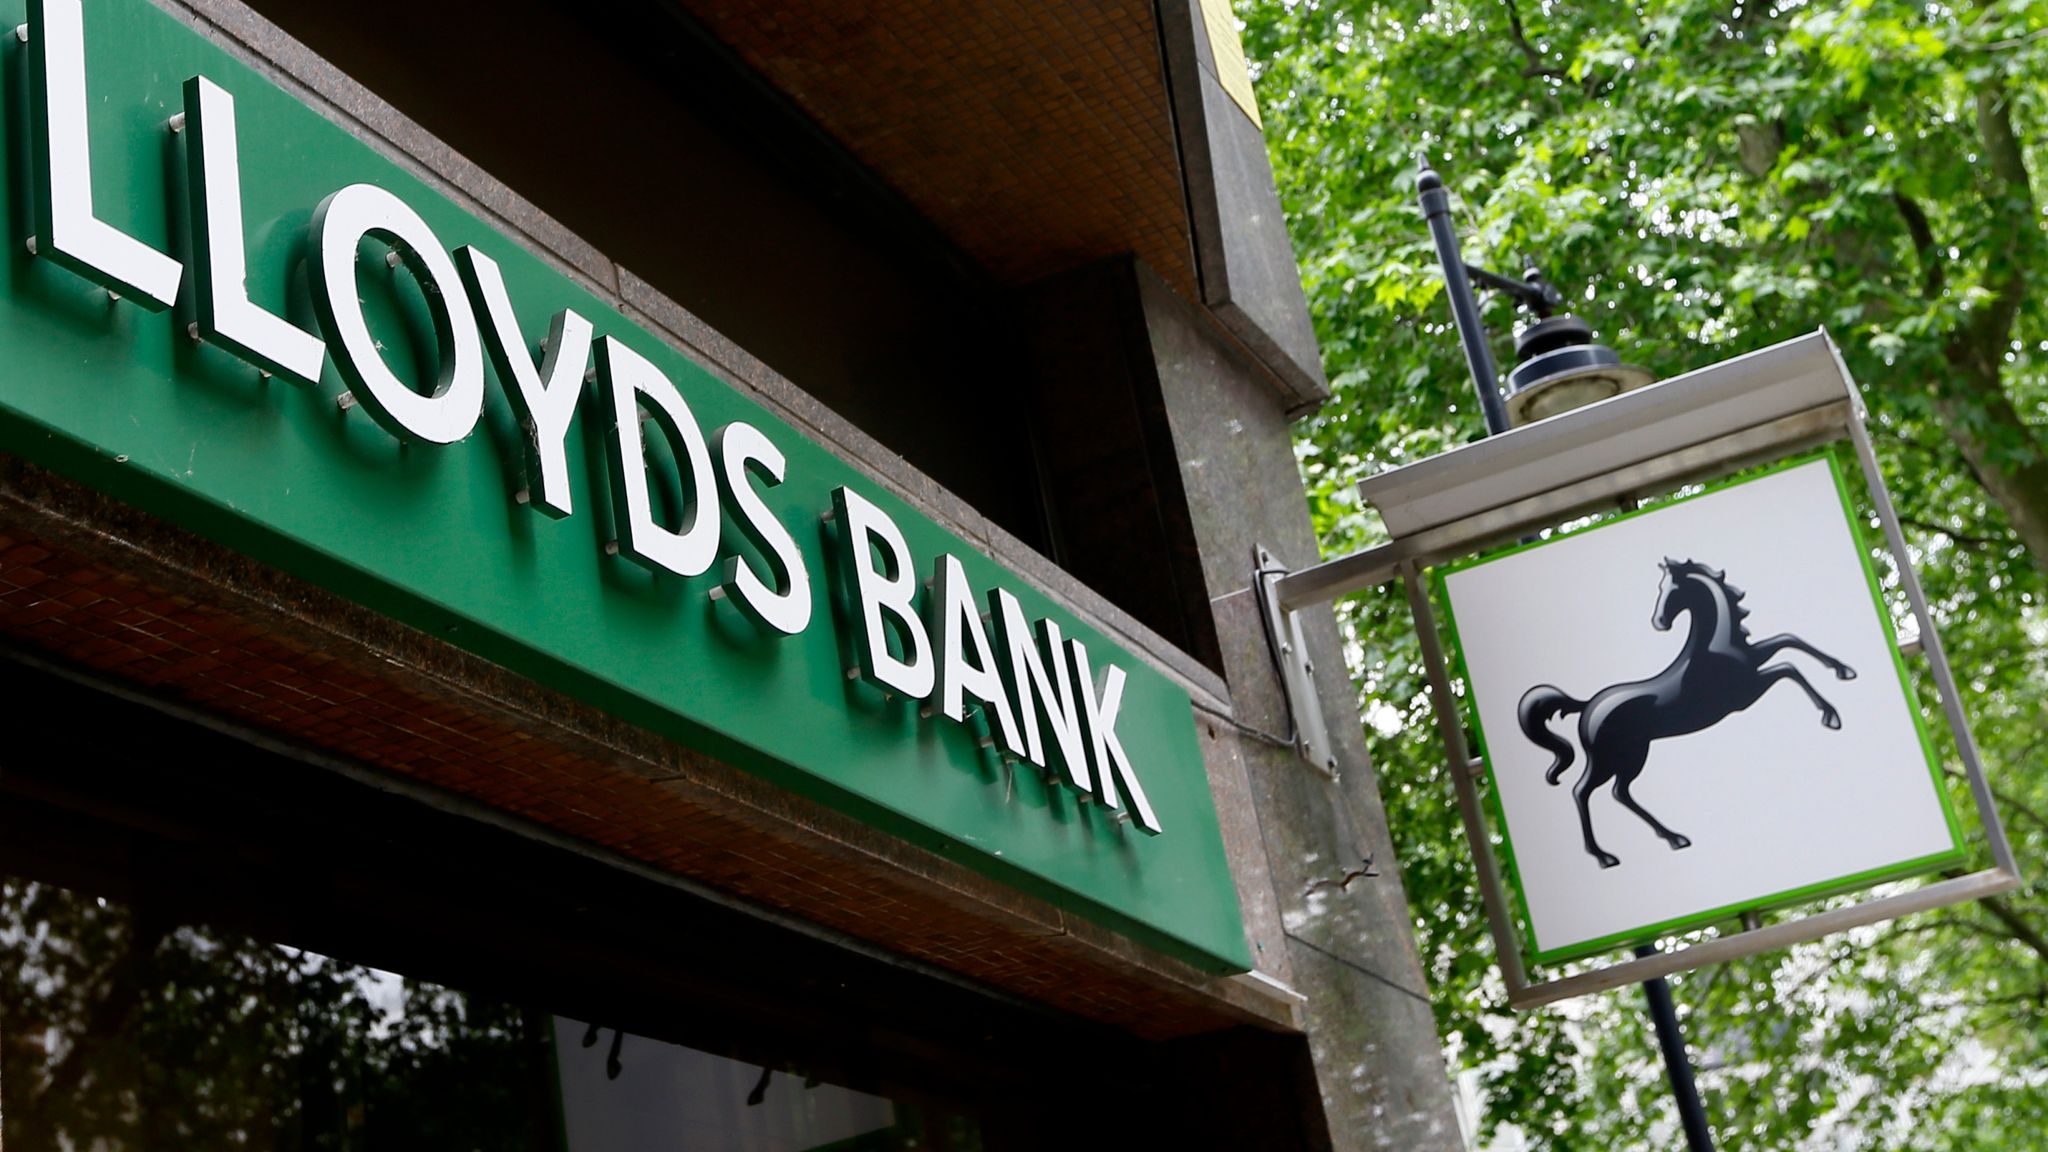 Lloyds axes mobile bank branches as lender shifts services online